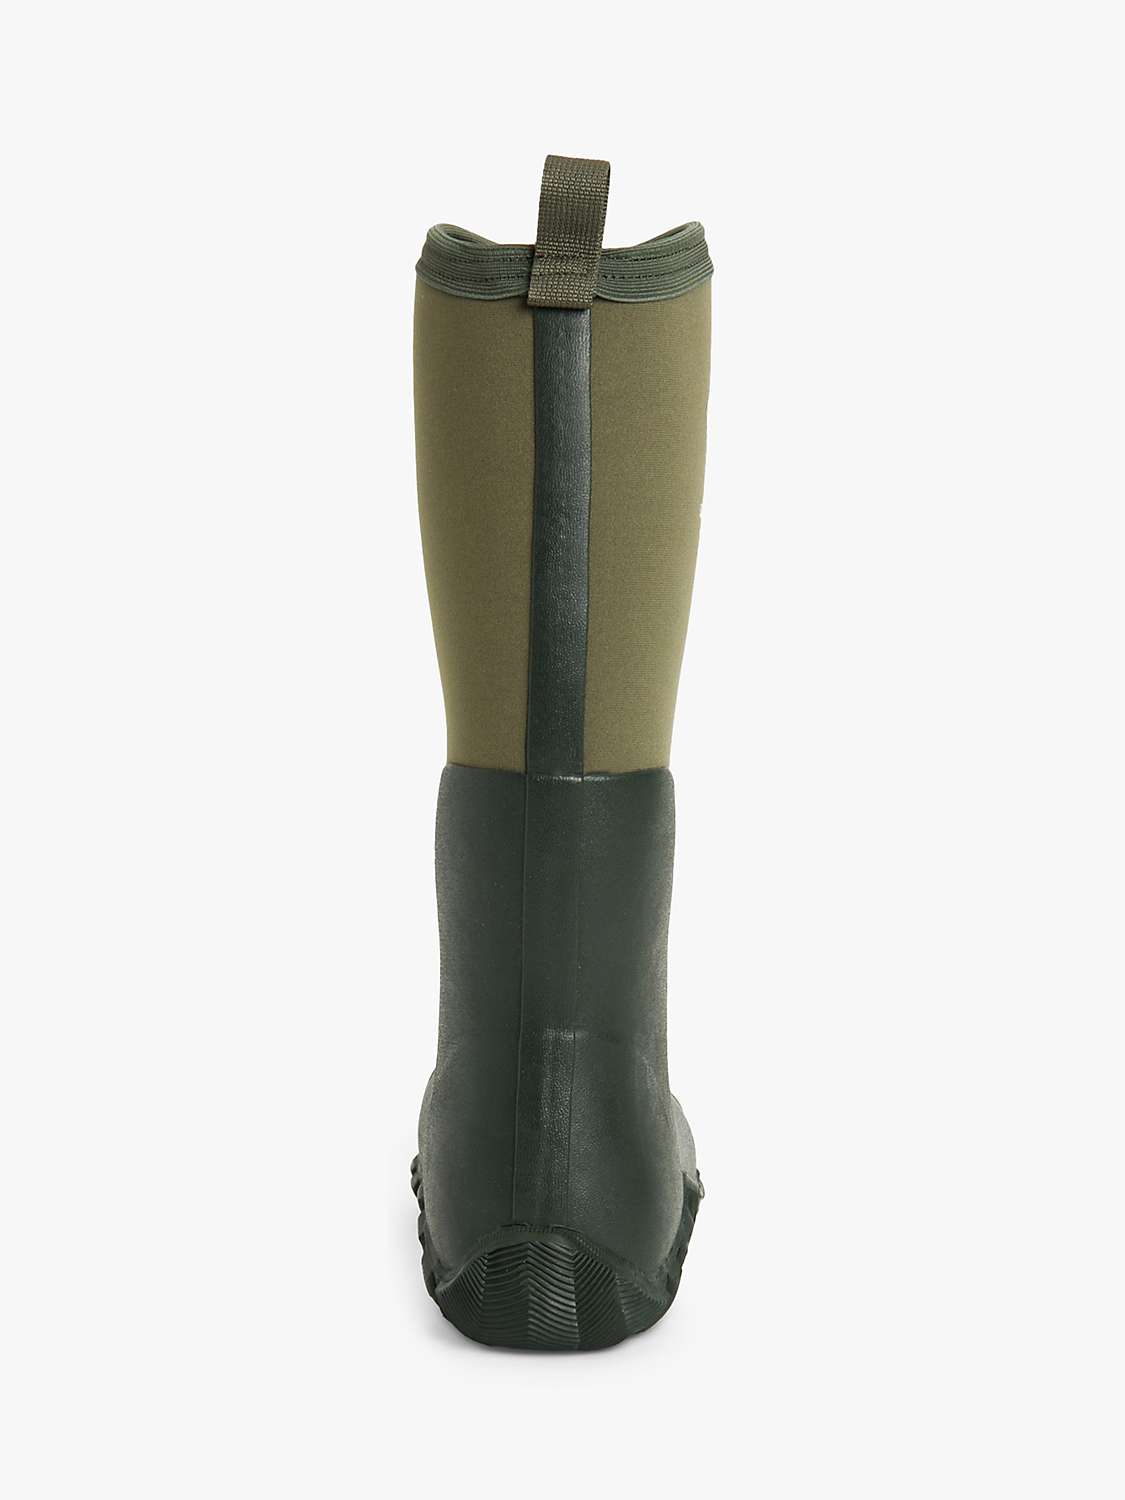 Buy Muck Edgewater II All Purpose Boots Online at johnlewis.com